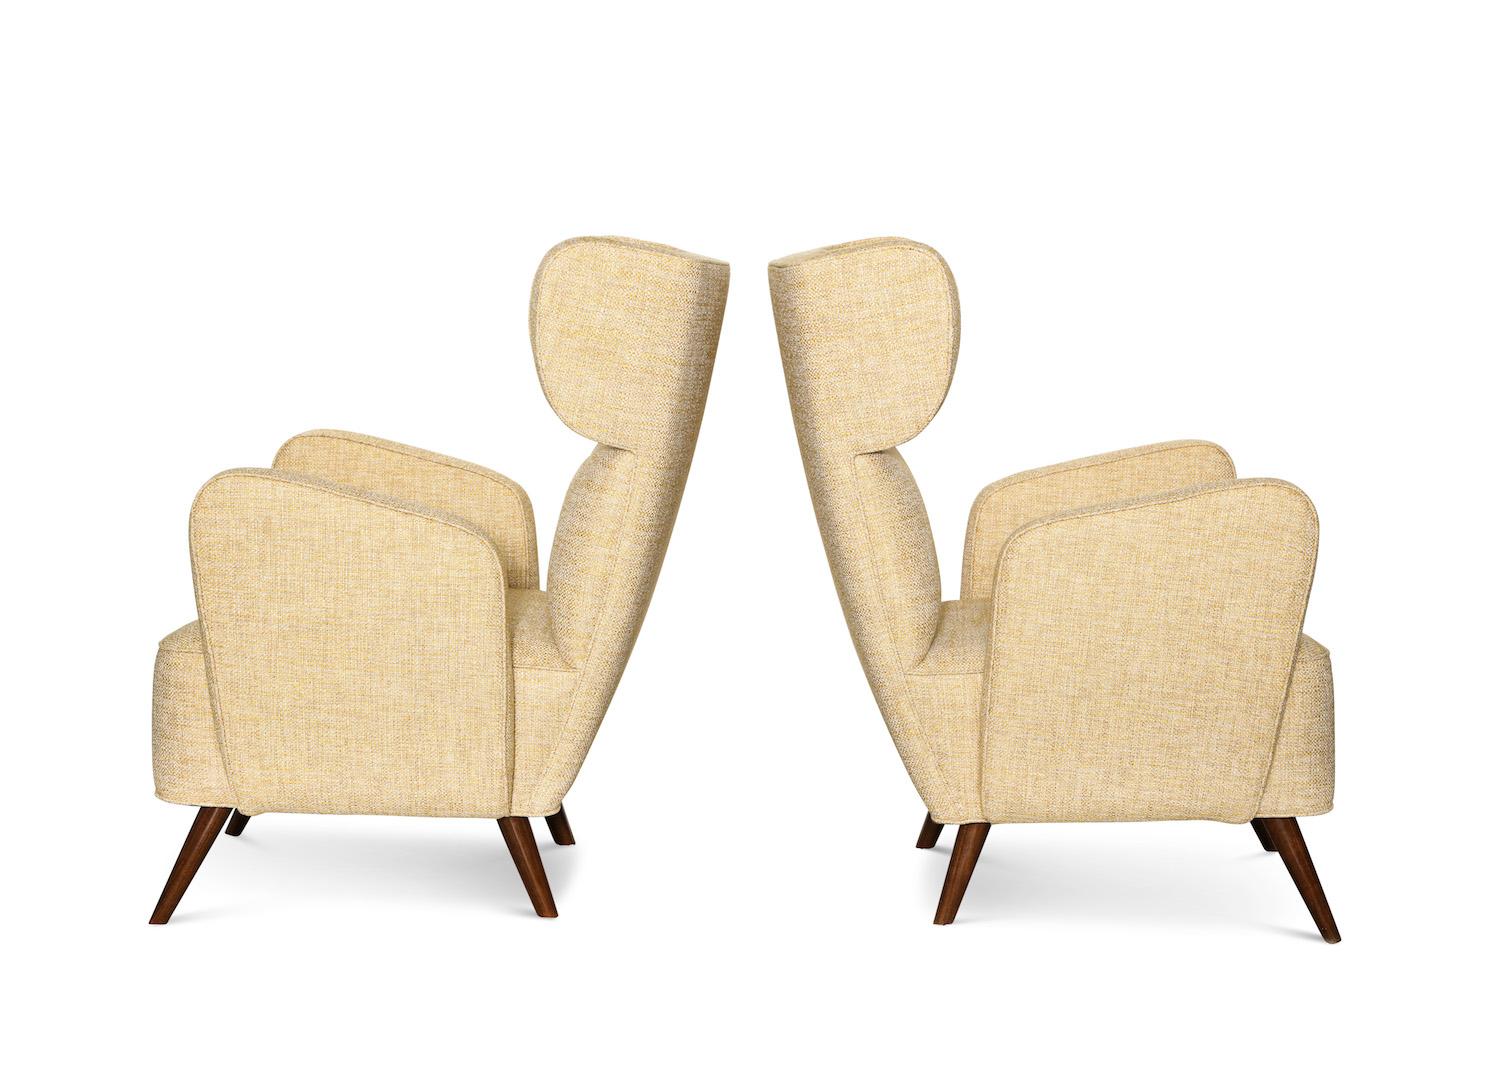 "Treno" Contemporary Lounge Chairs For Sale